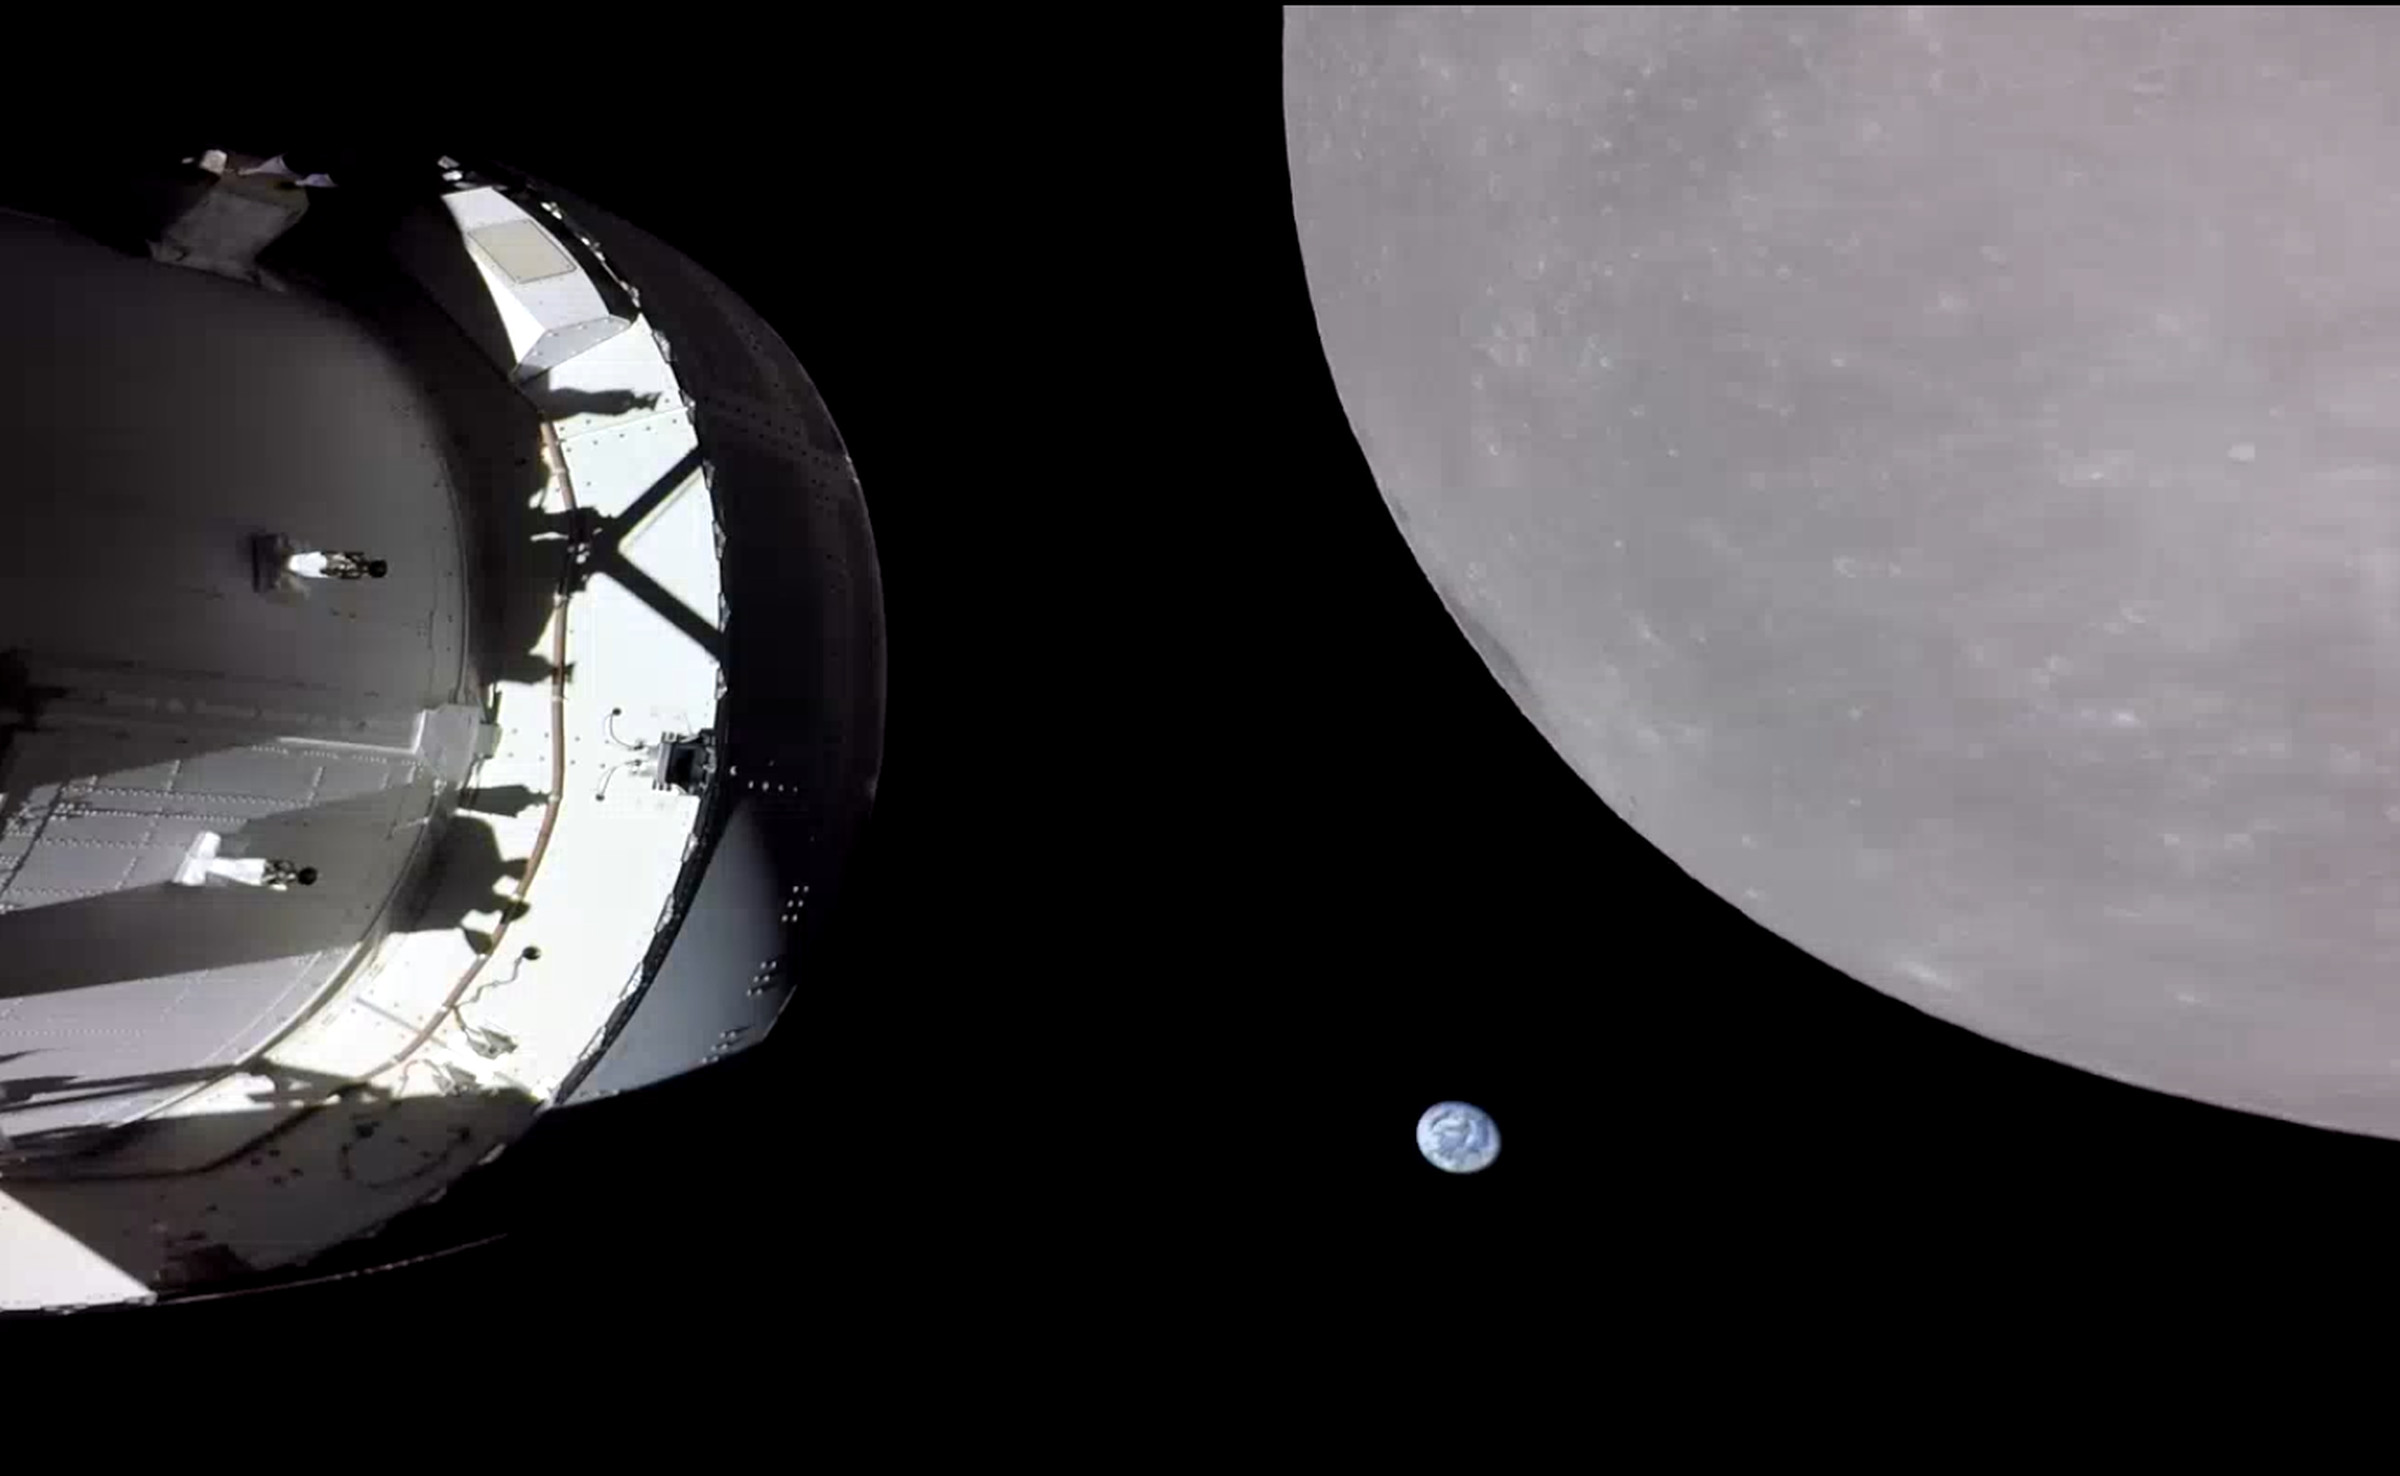 The Orion capsule sits in shadow to the left. To the right, the grey bulk of the Moon dominates the image. Between the two, Earth appears as a small blue and white ball. 